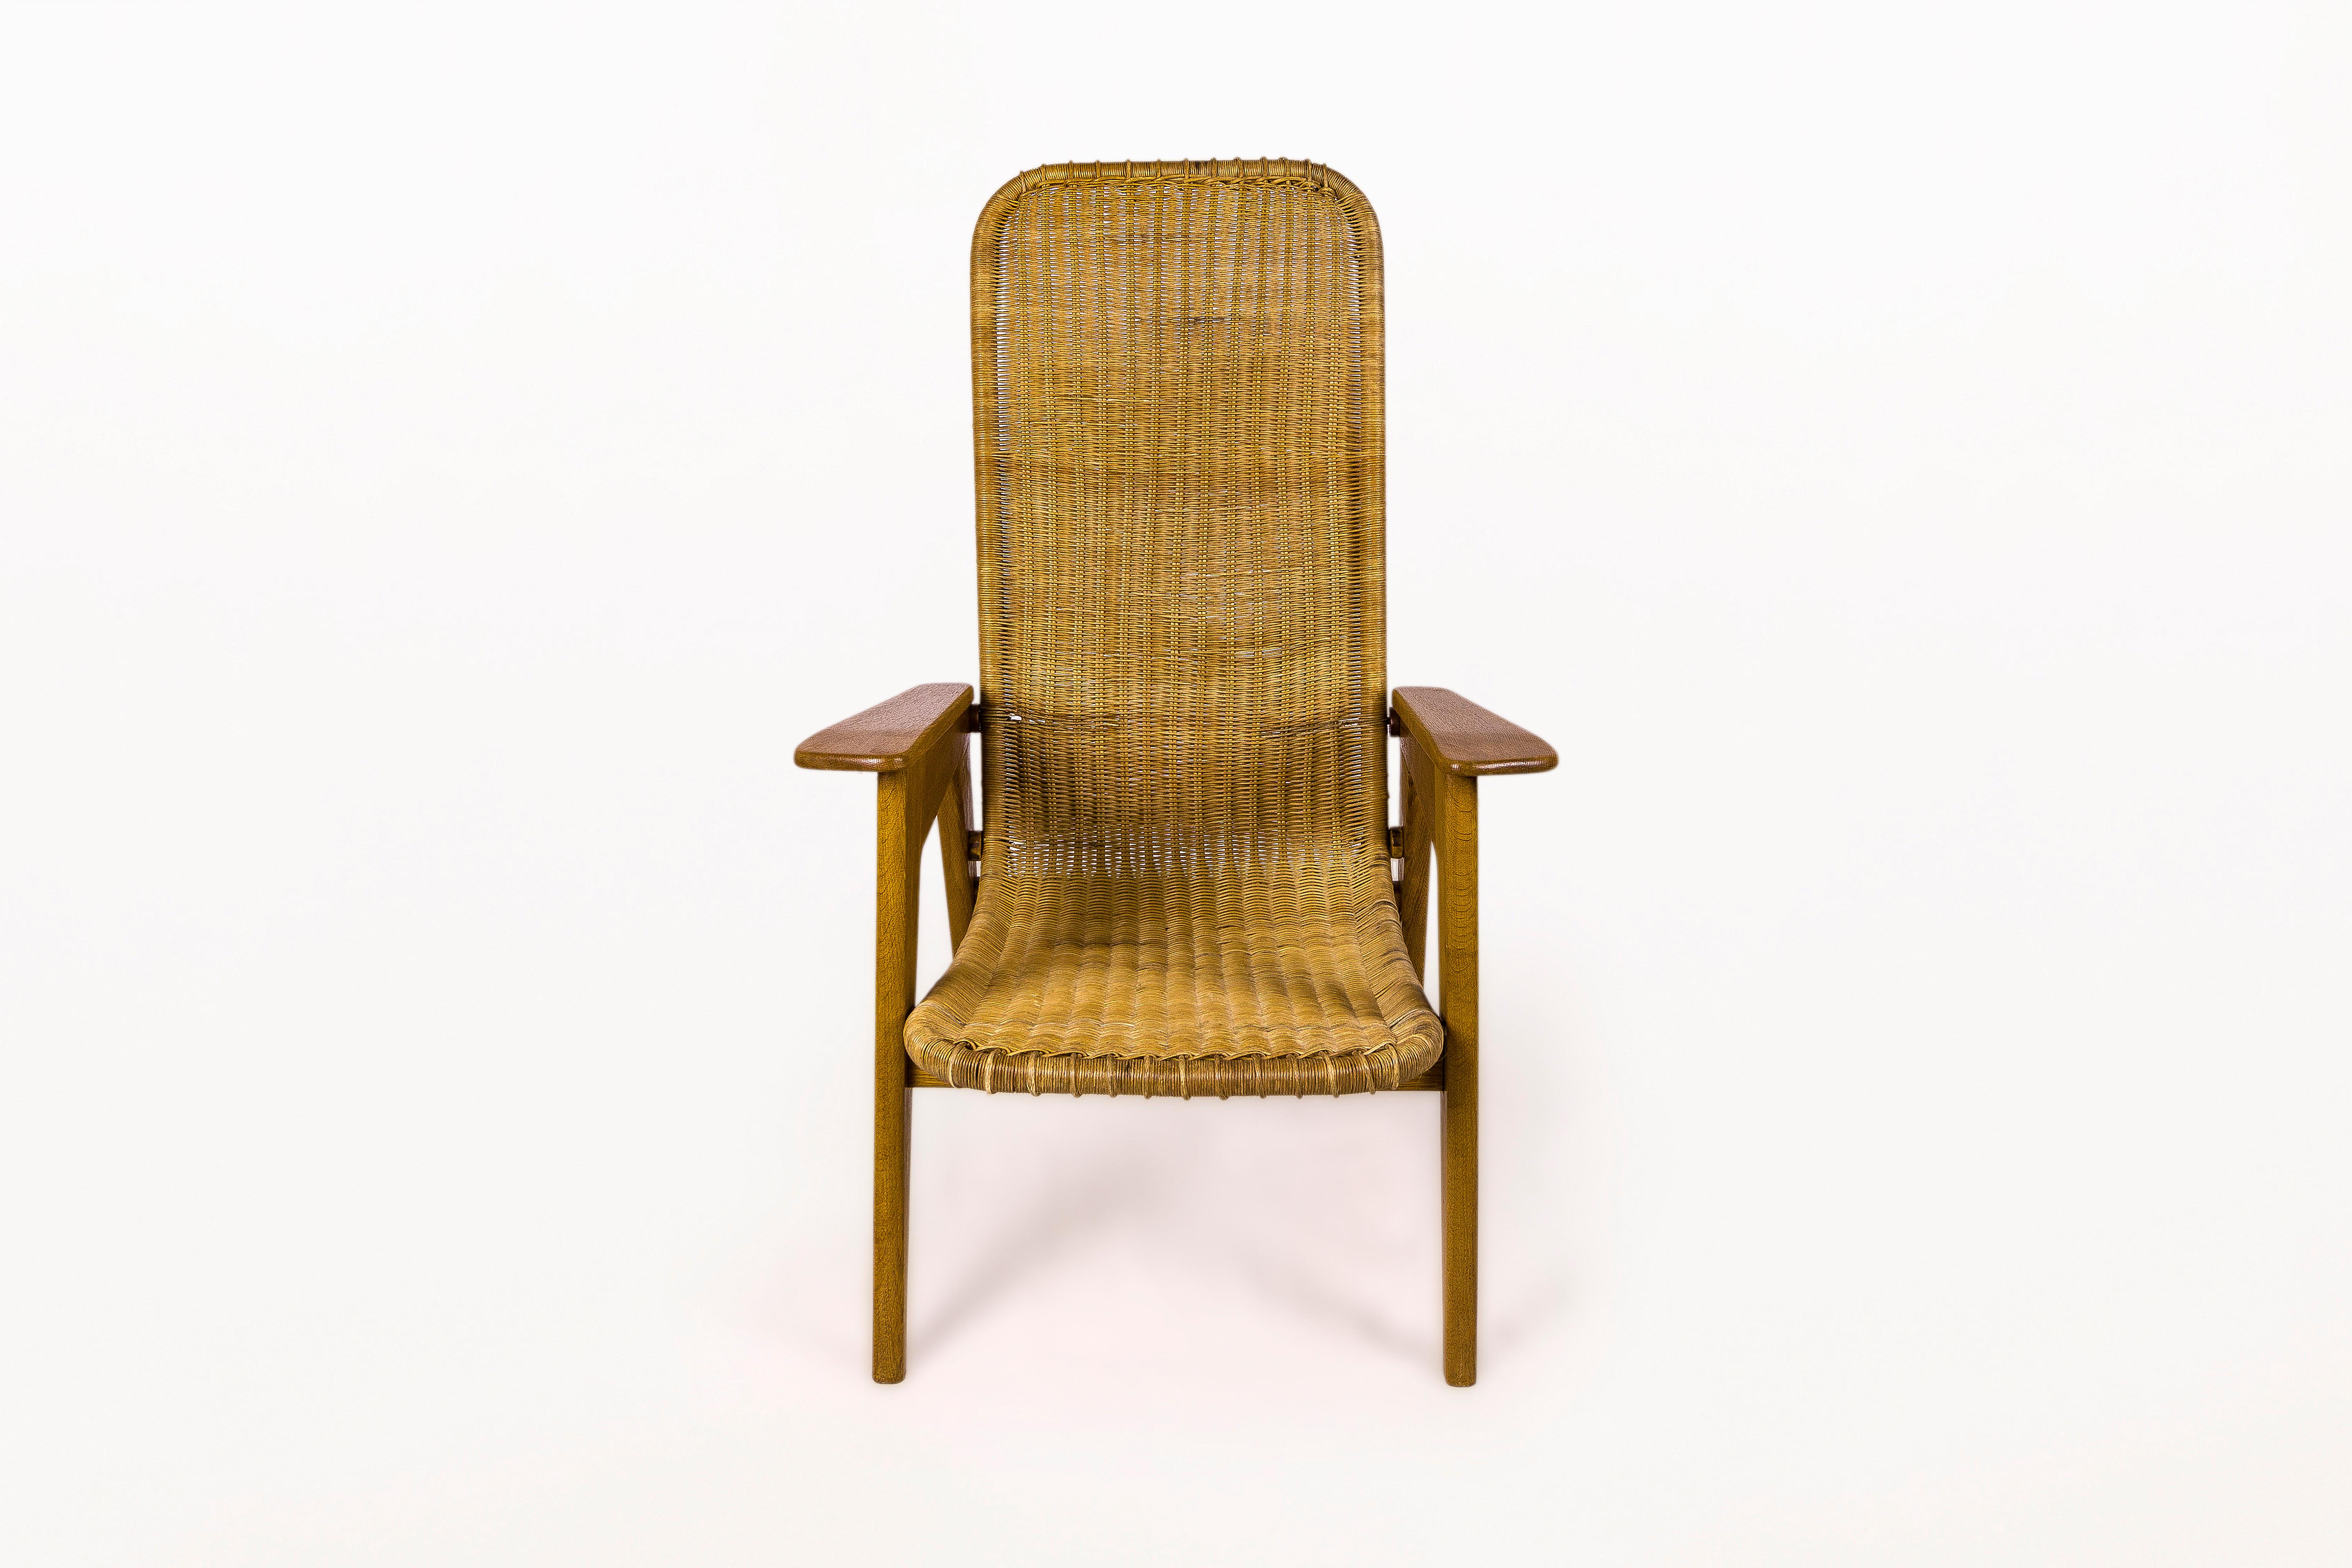 Pair of armchairs.
Made with oak and rattan.
Oak structure
Rattan seat
Modern design,
circa 1950, France.
Very good vintage condition.